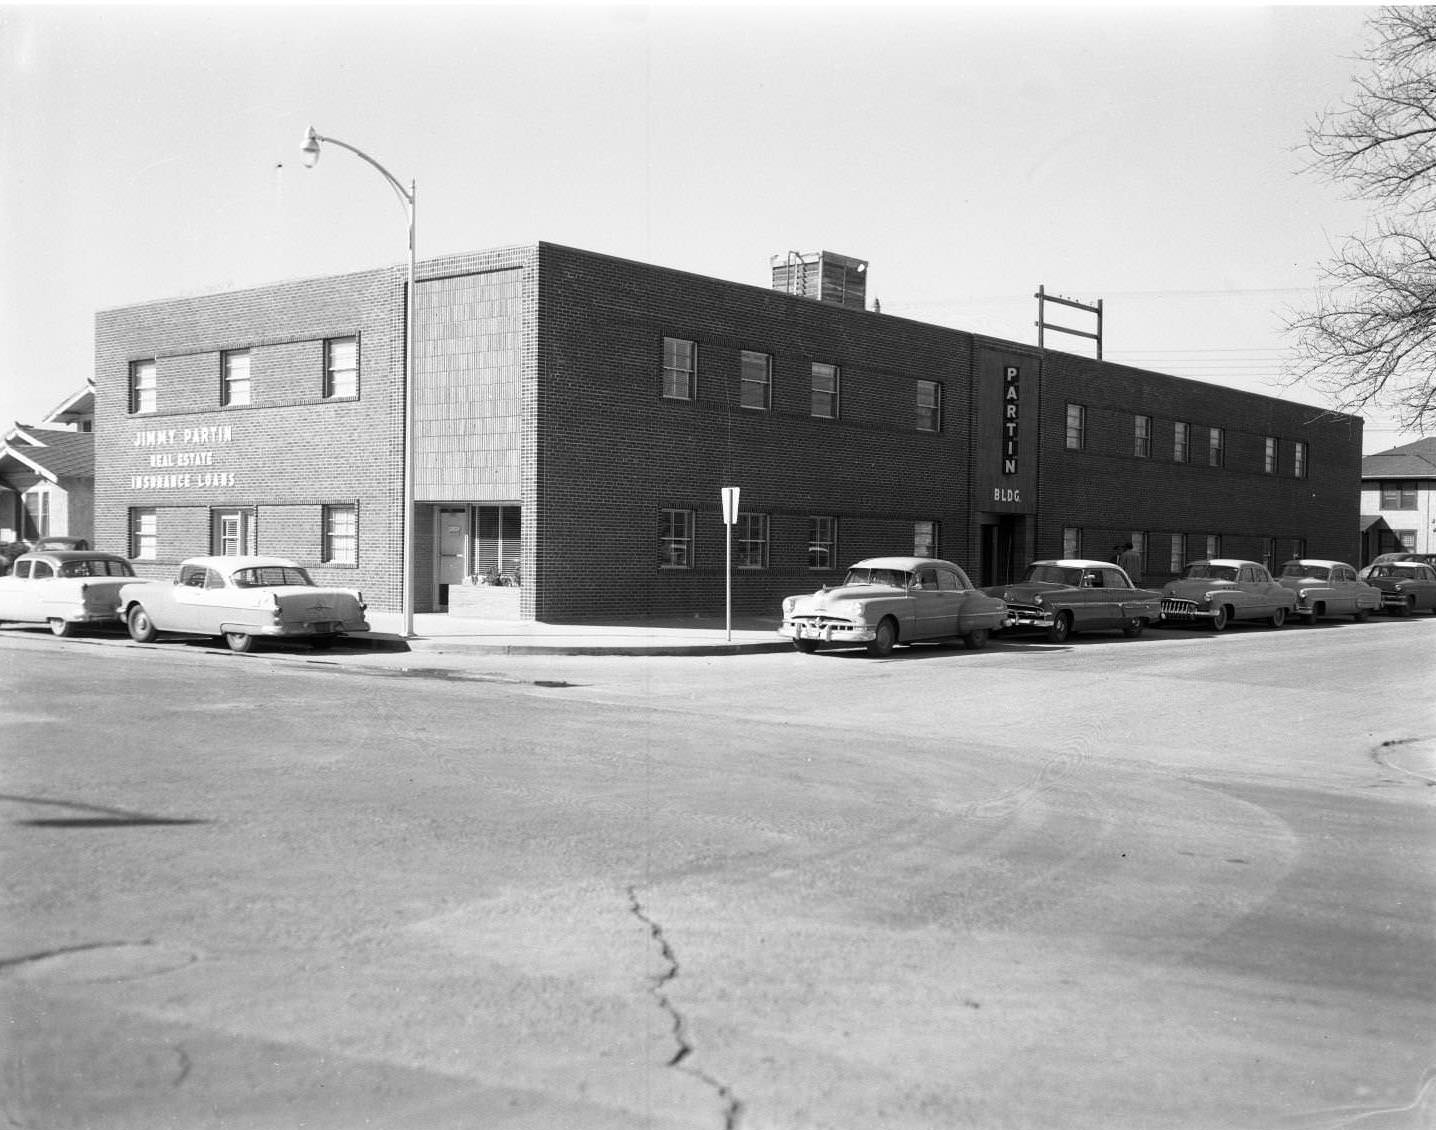 The Partin Real Estate building on N. 4th St. in Abilene, 1956.